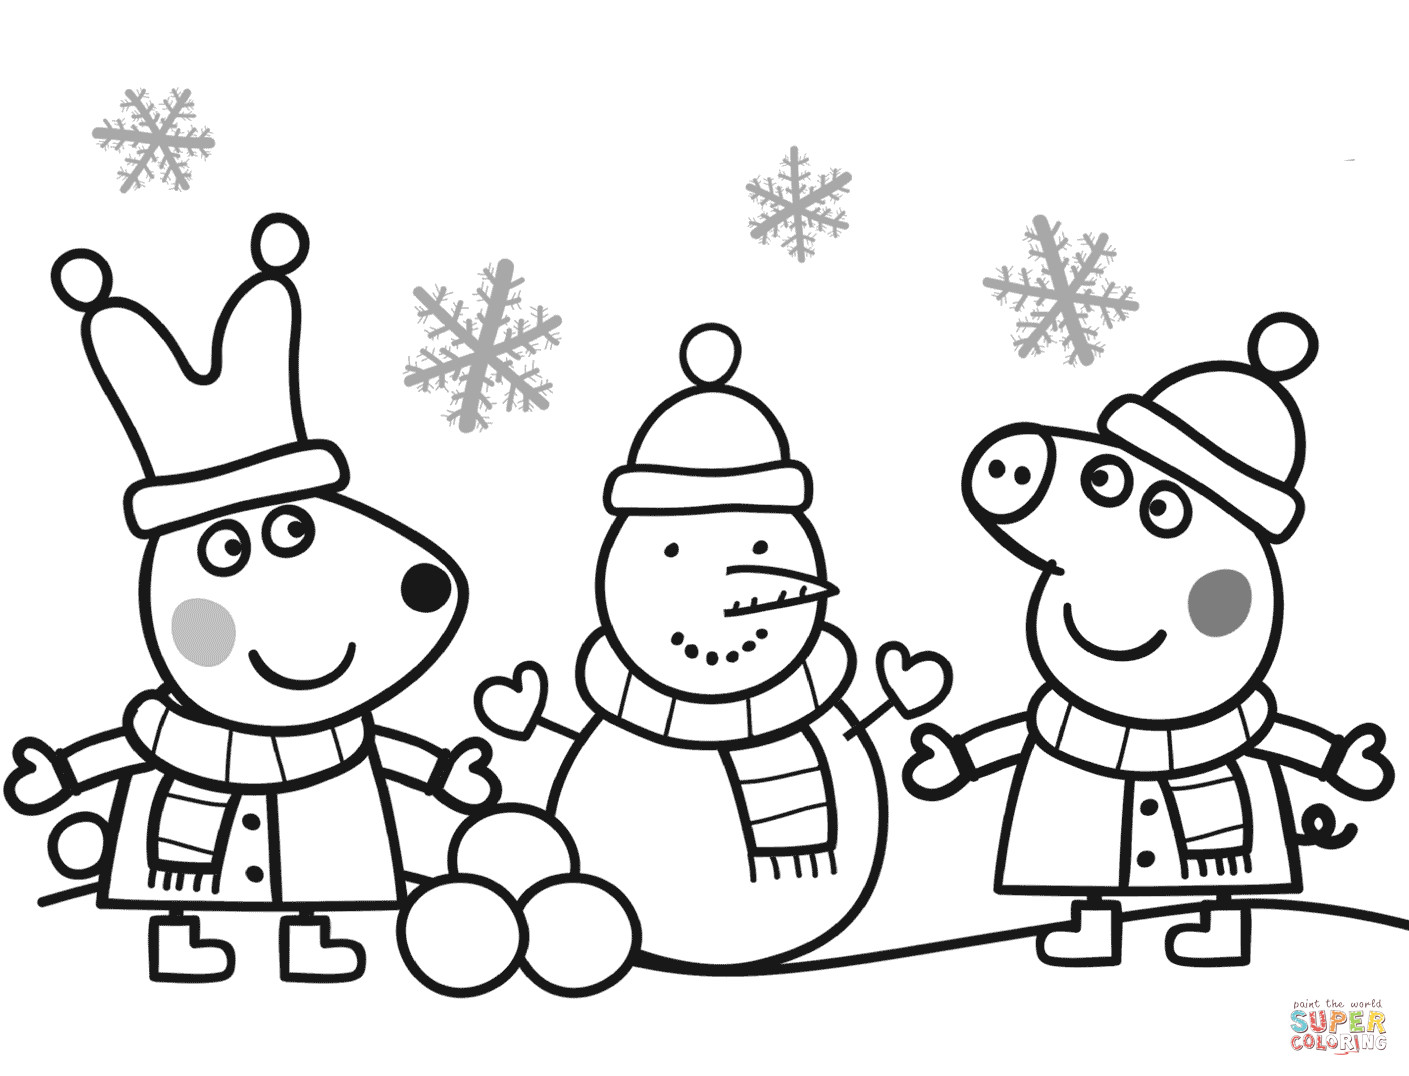 Peppa Pig Coloring Pages Pdf
 Peppa and Rebecca are Making Snowman coloring page